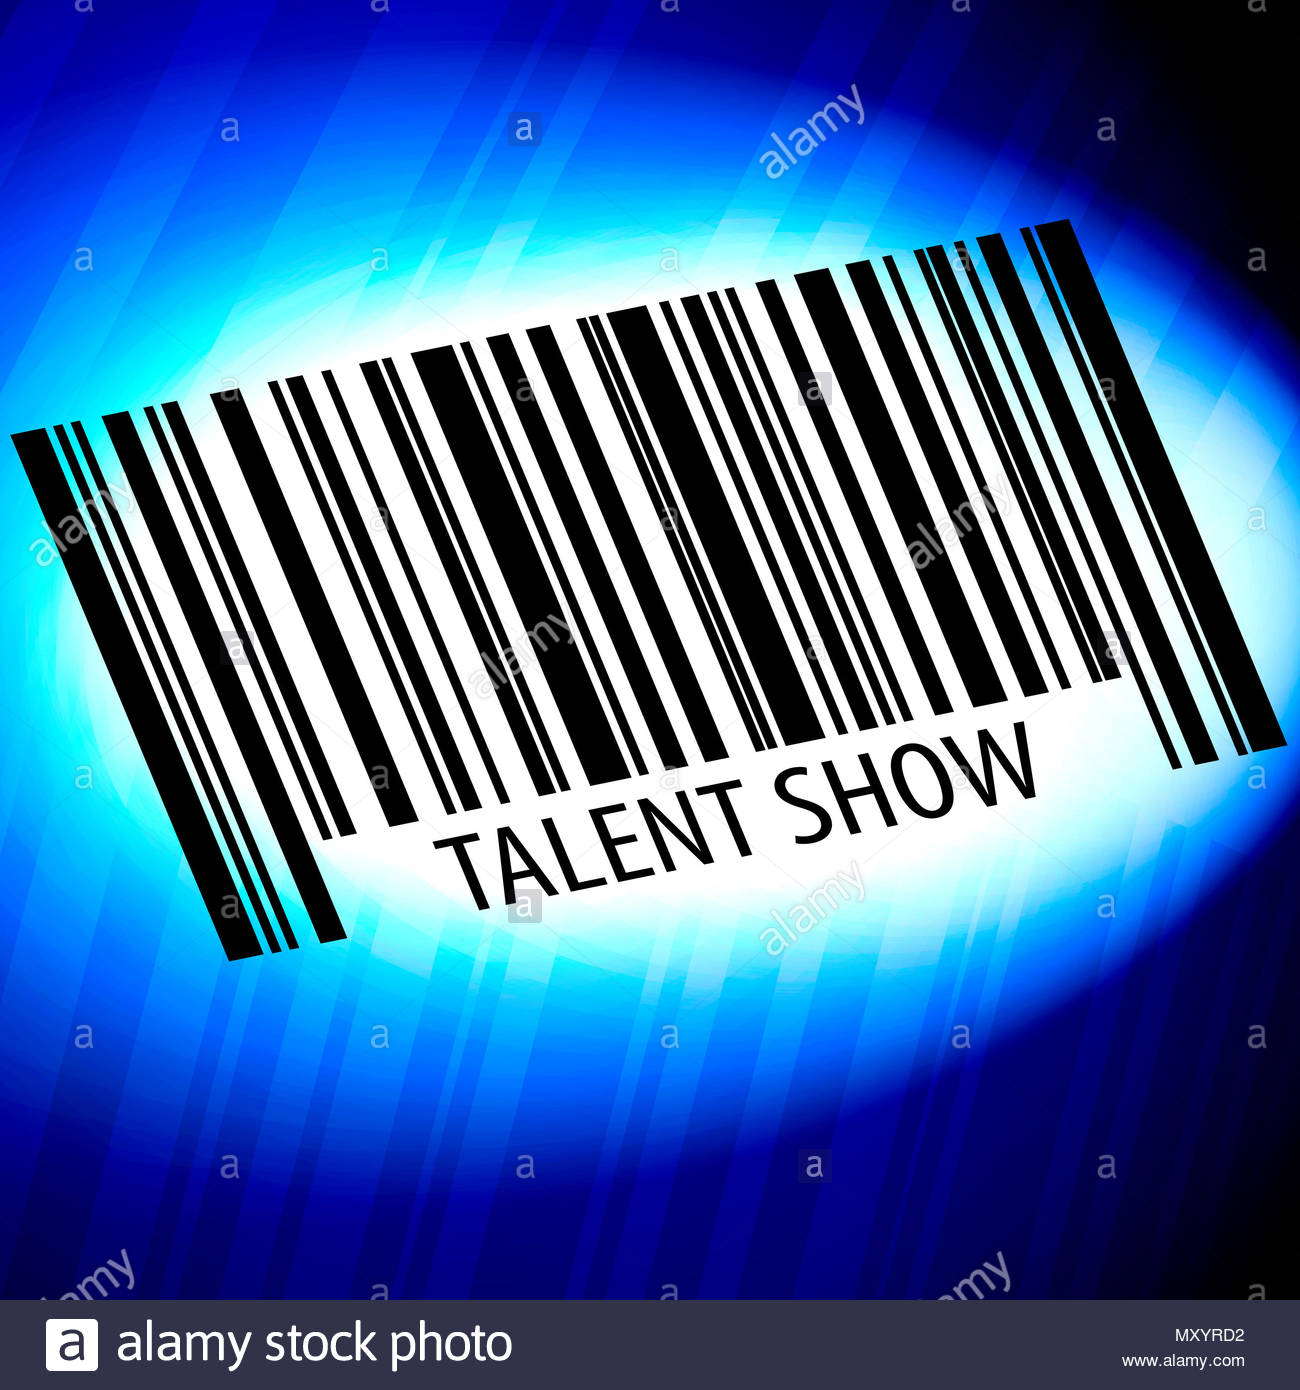 Talent Show Barcode With Blue Background Stock Photo